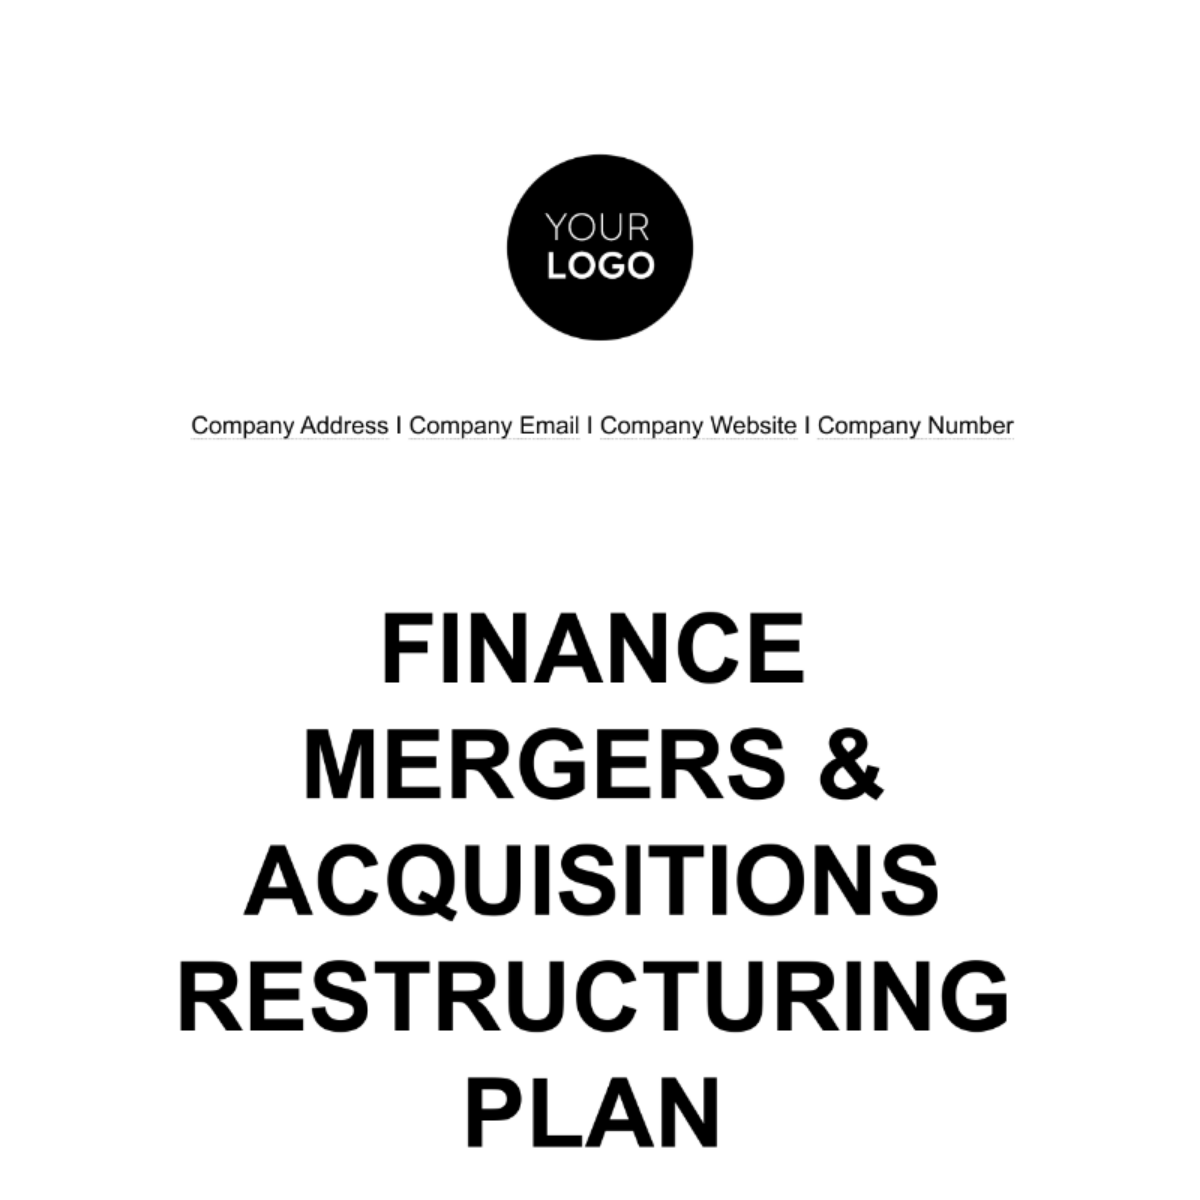 Finance Mergers & Acquisitions Restructuring Plan Template